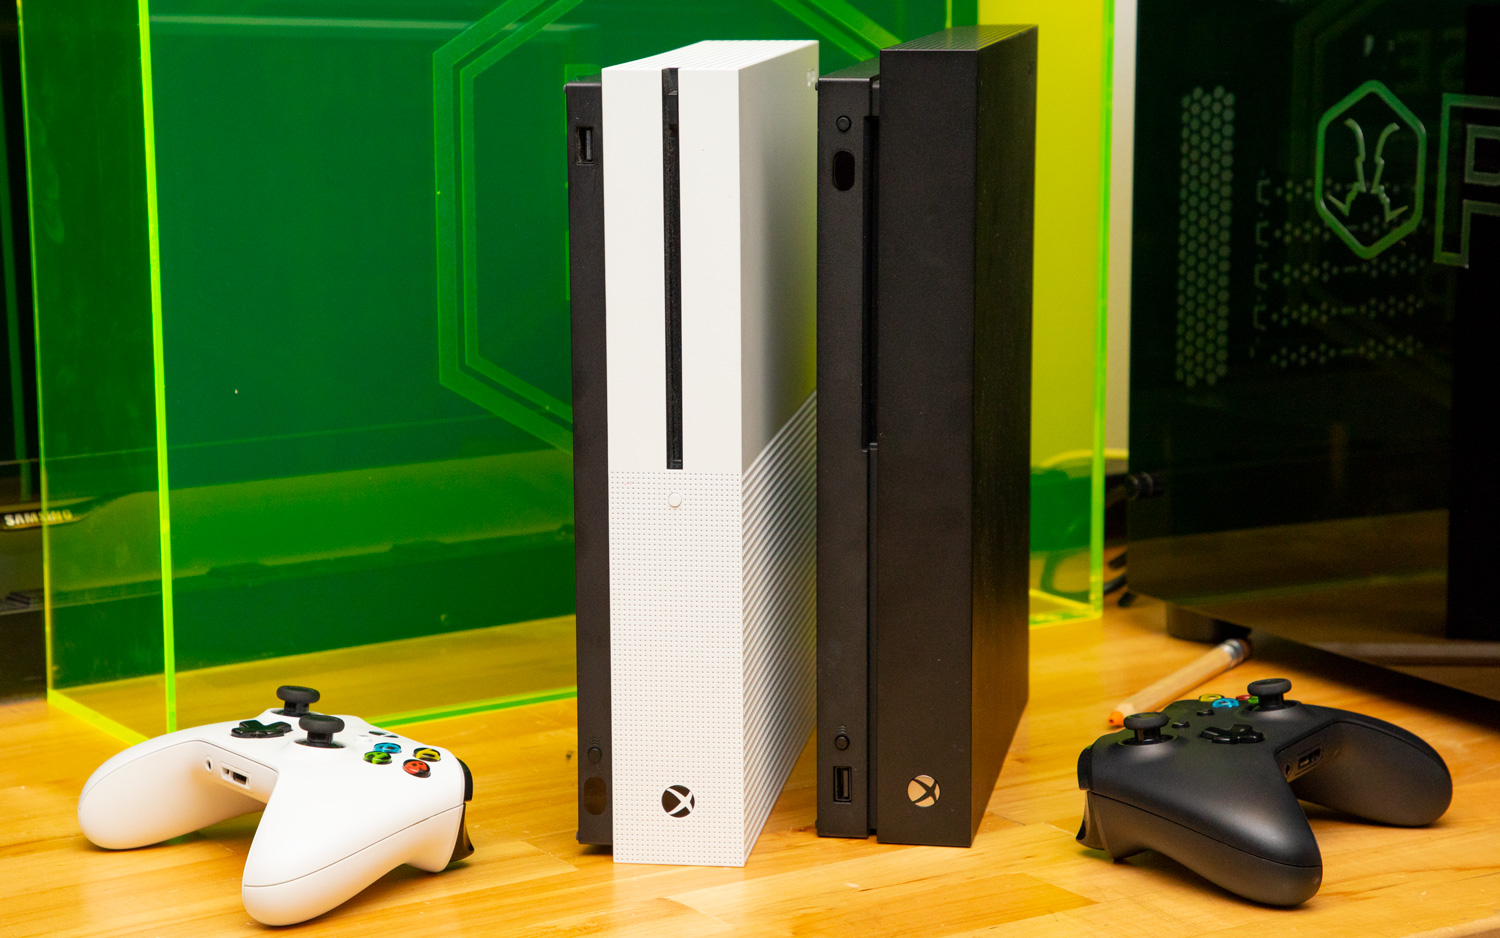 The Xbox One S and Xbox One X. Credit: Tom's Guide